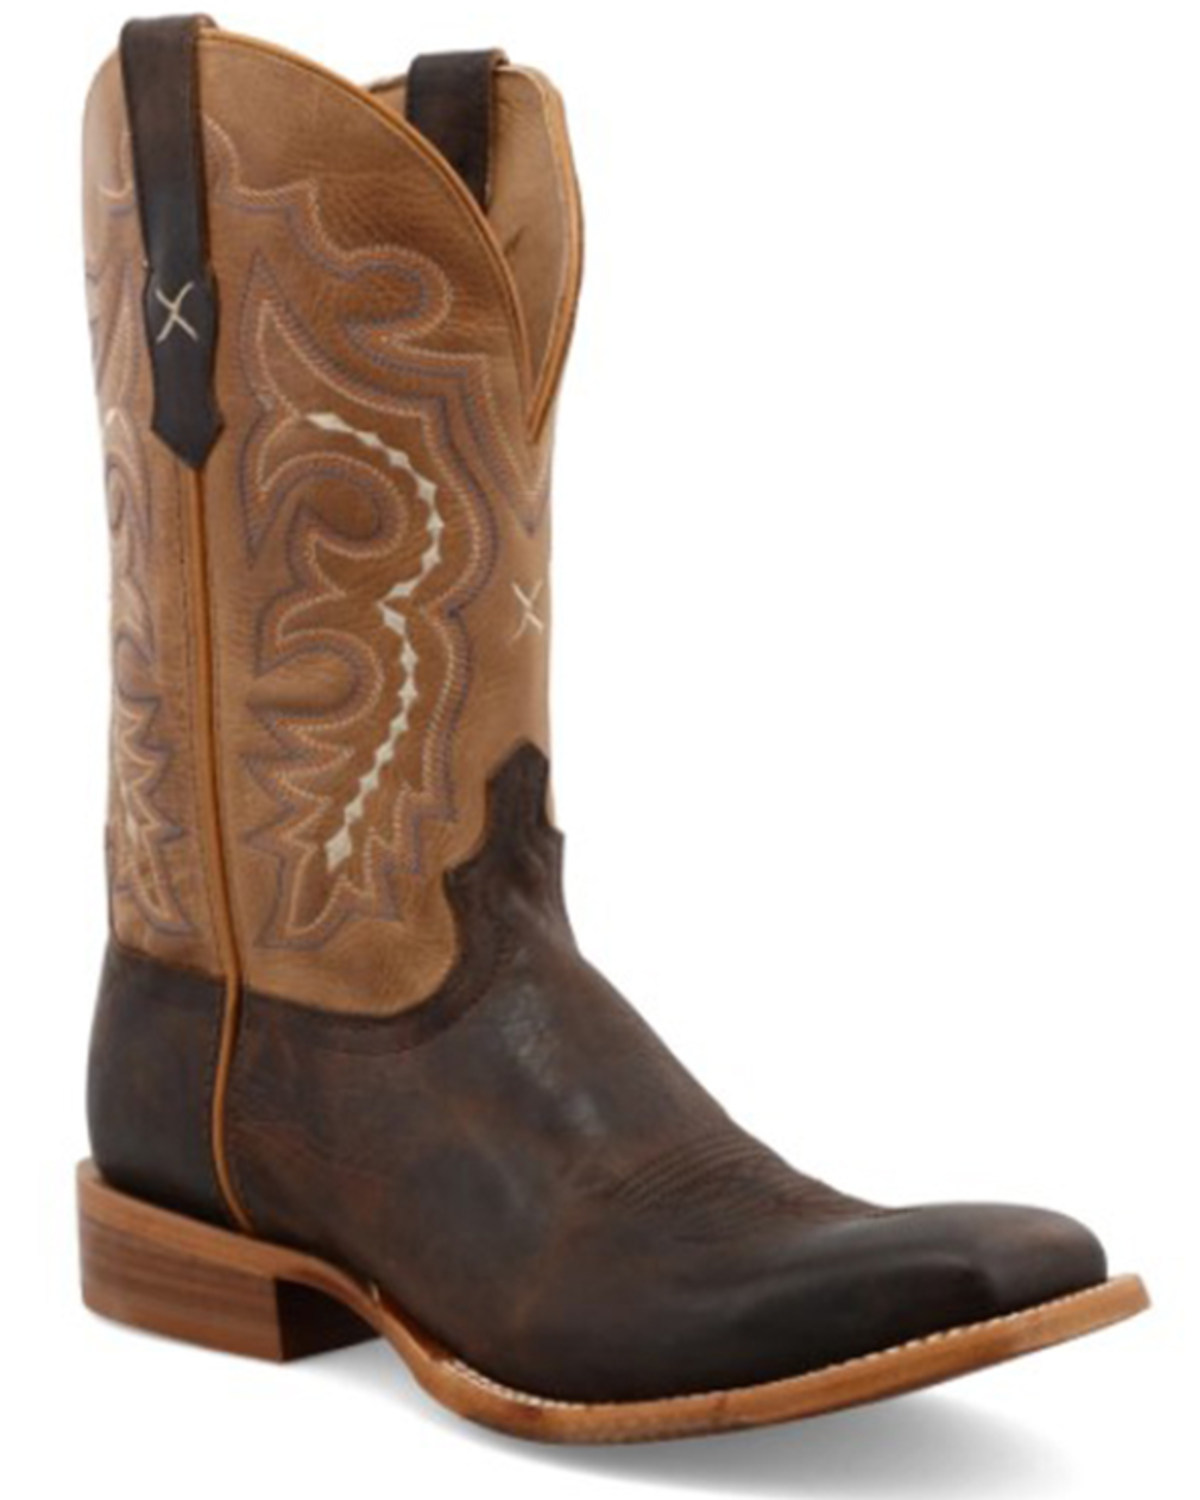 Twisted X Men's Rancher Western Boot - Broad Square Toe